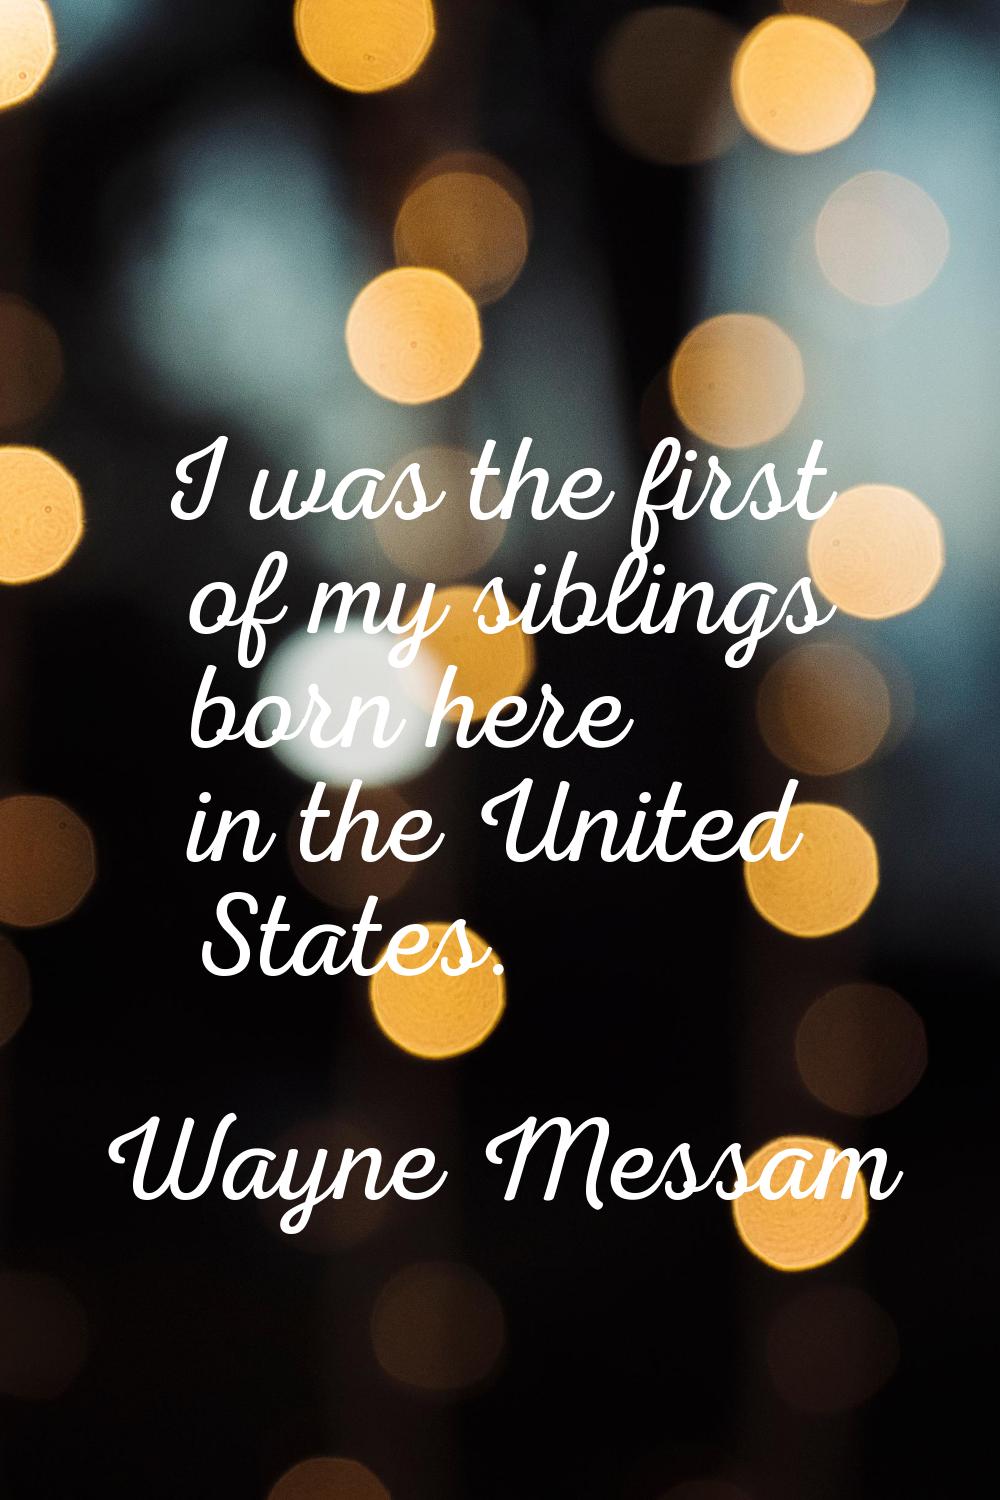 I was the first of my siblings born here in the United States.